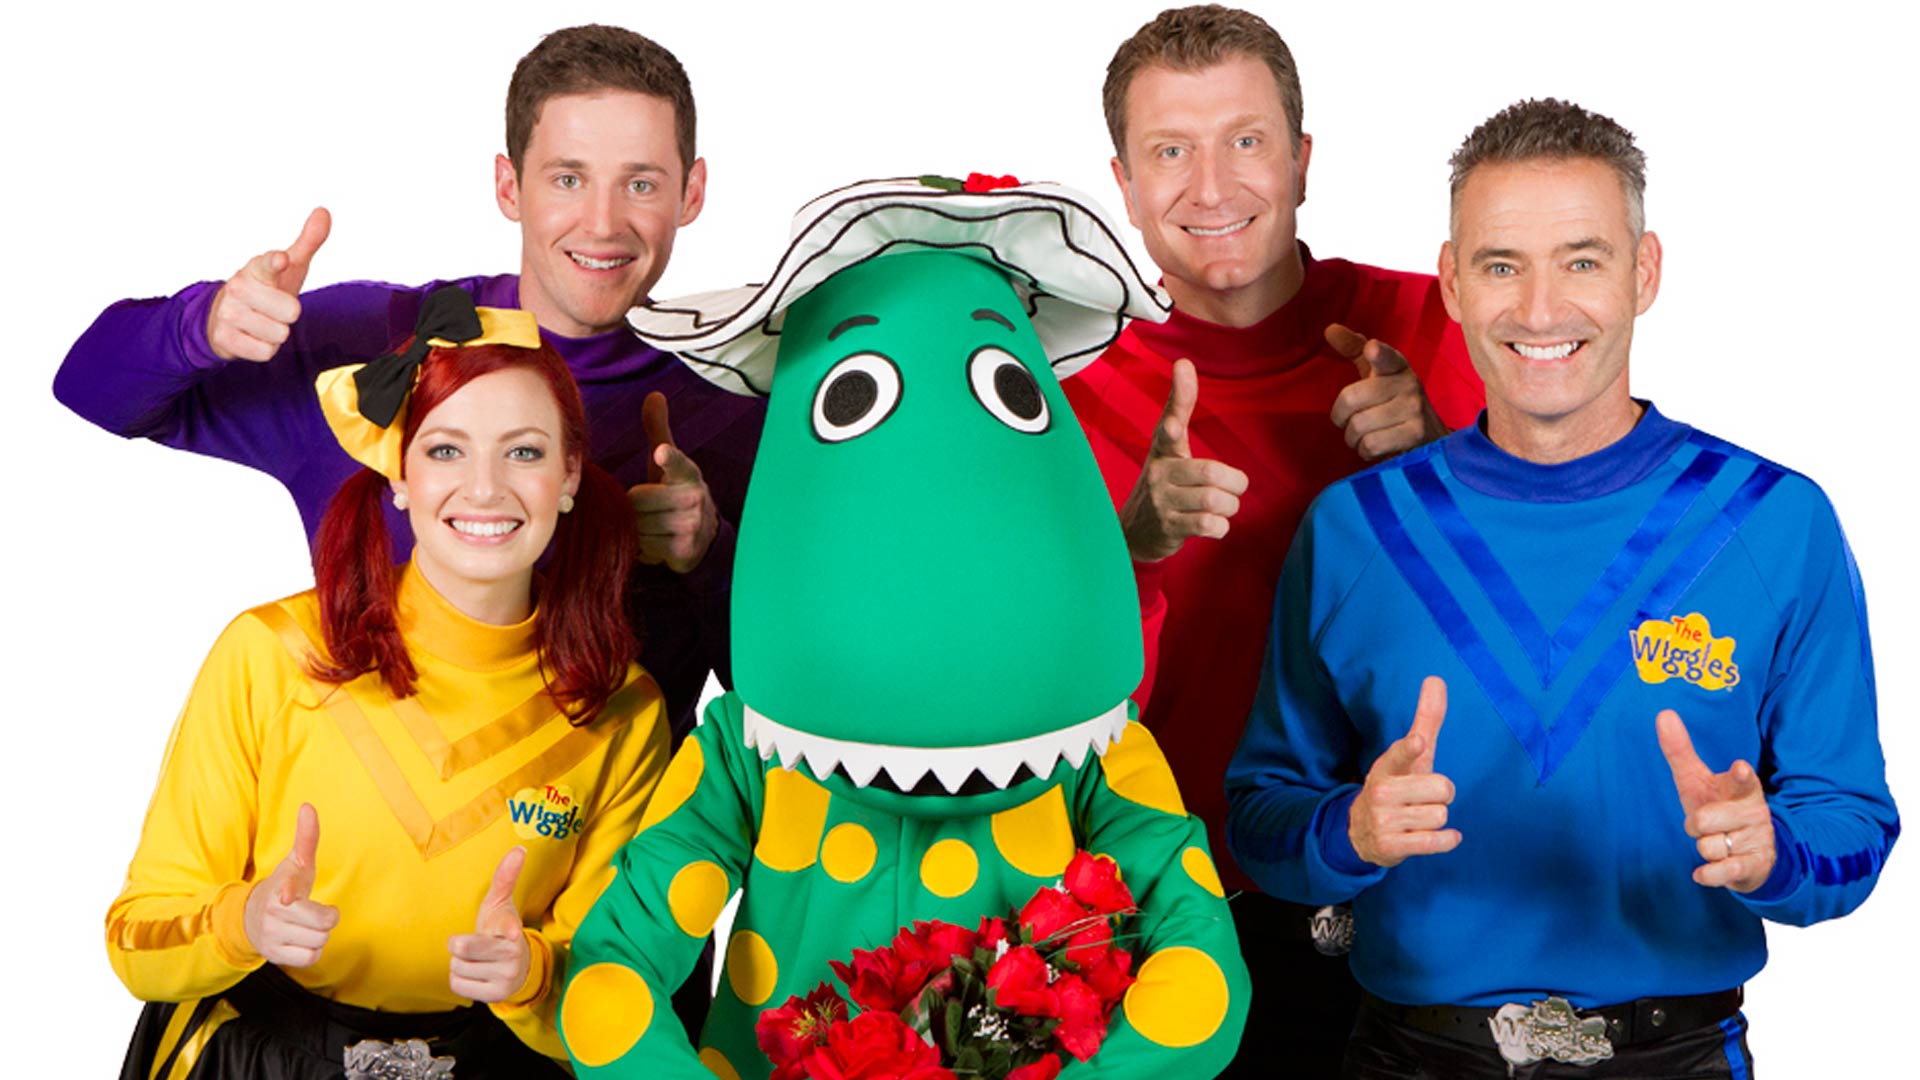 The Wiggles - THE WIGGLES Wallpaper (41657828) - Fanpop